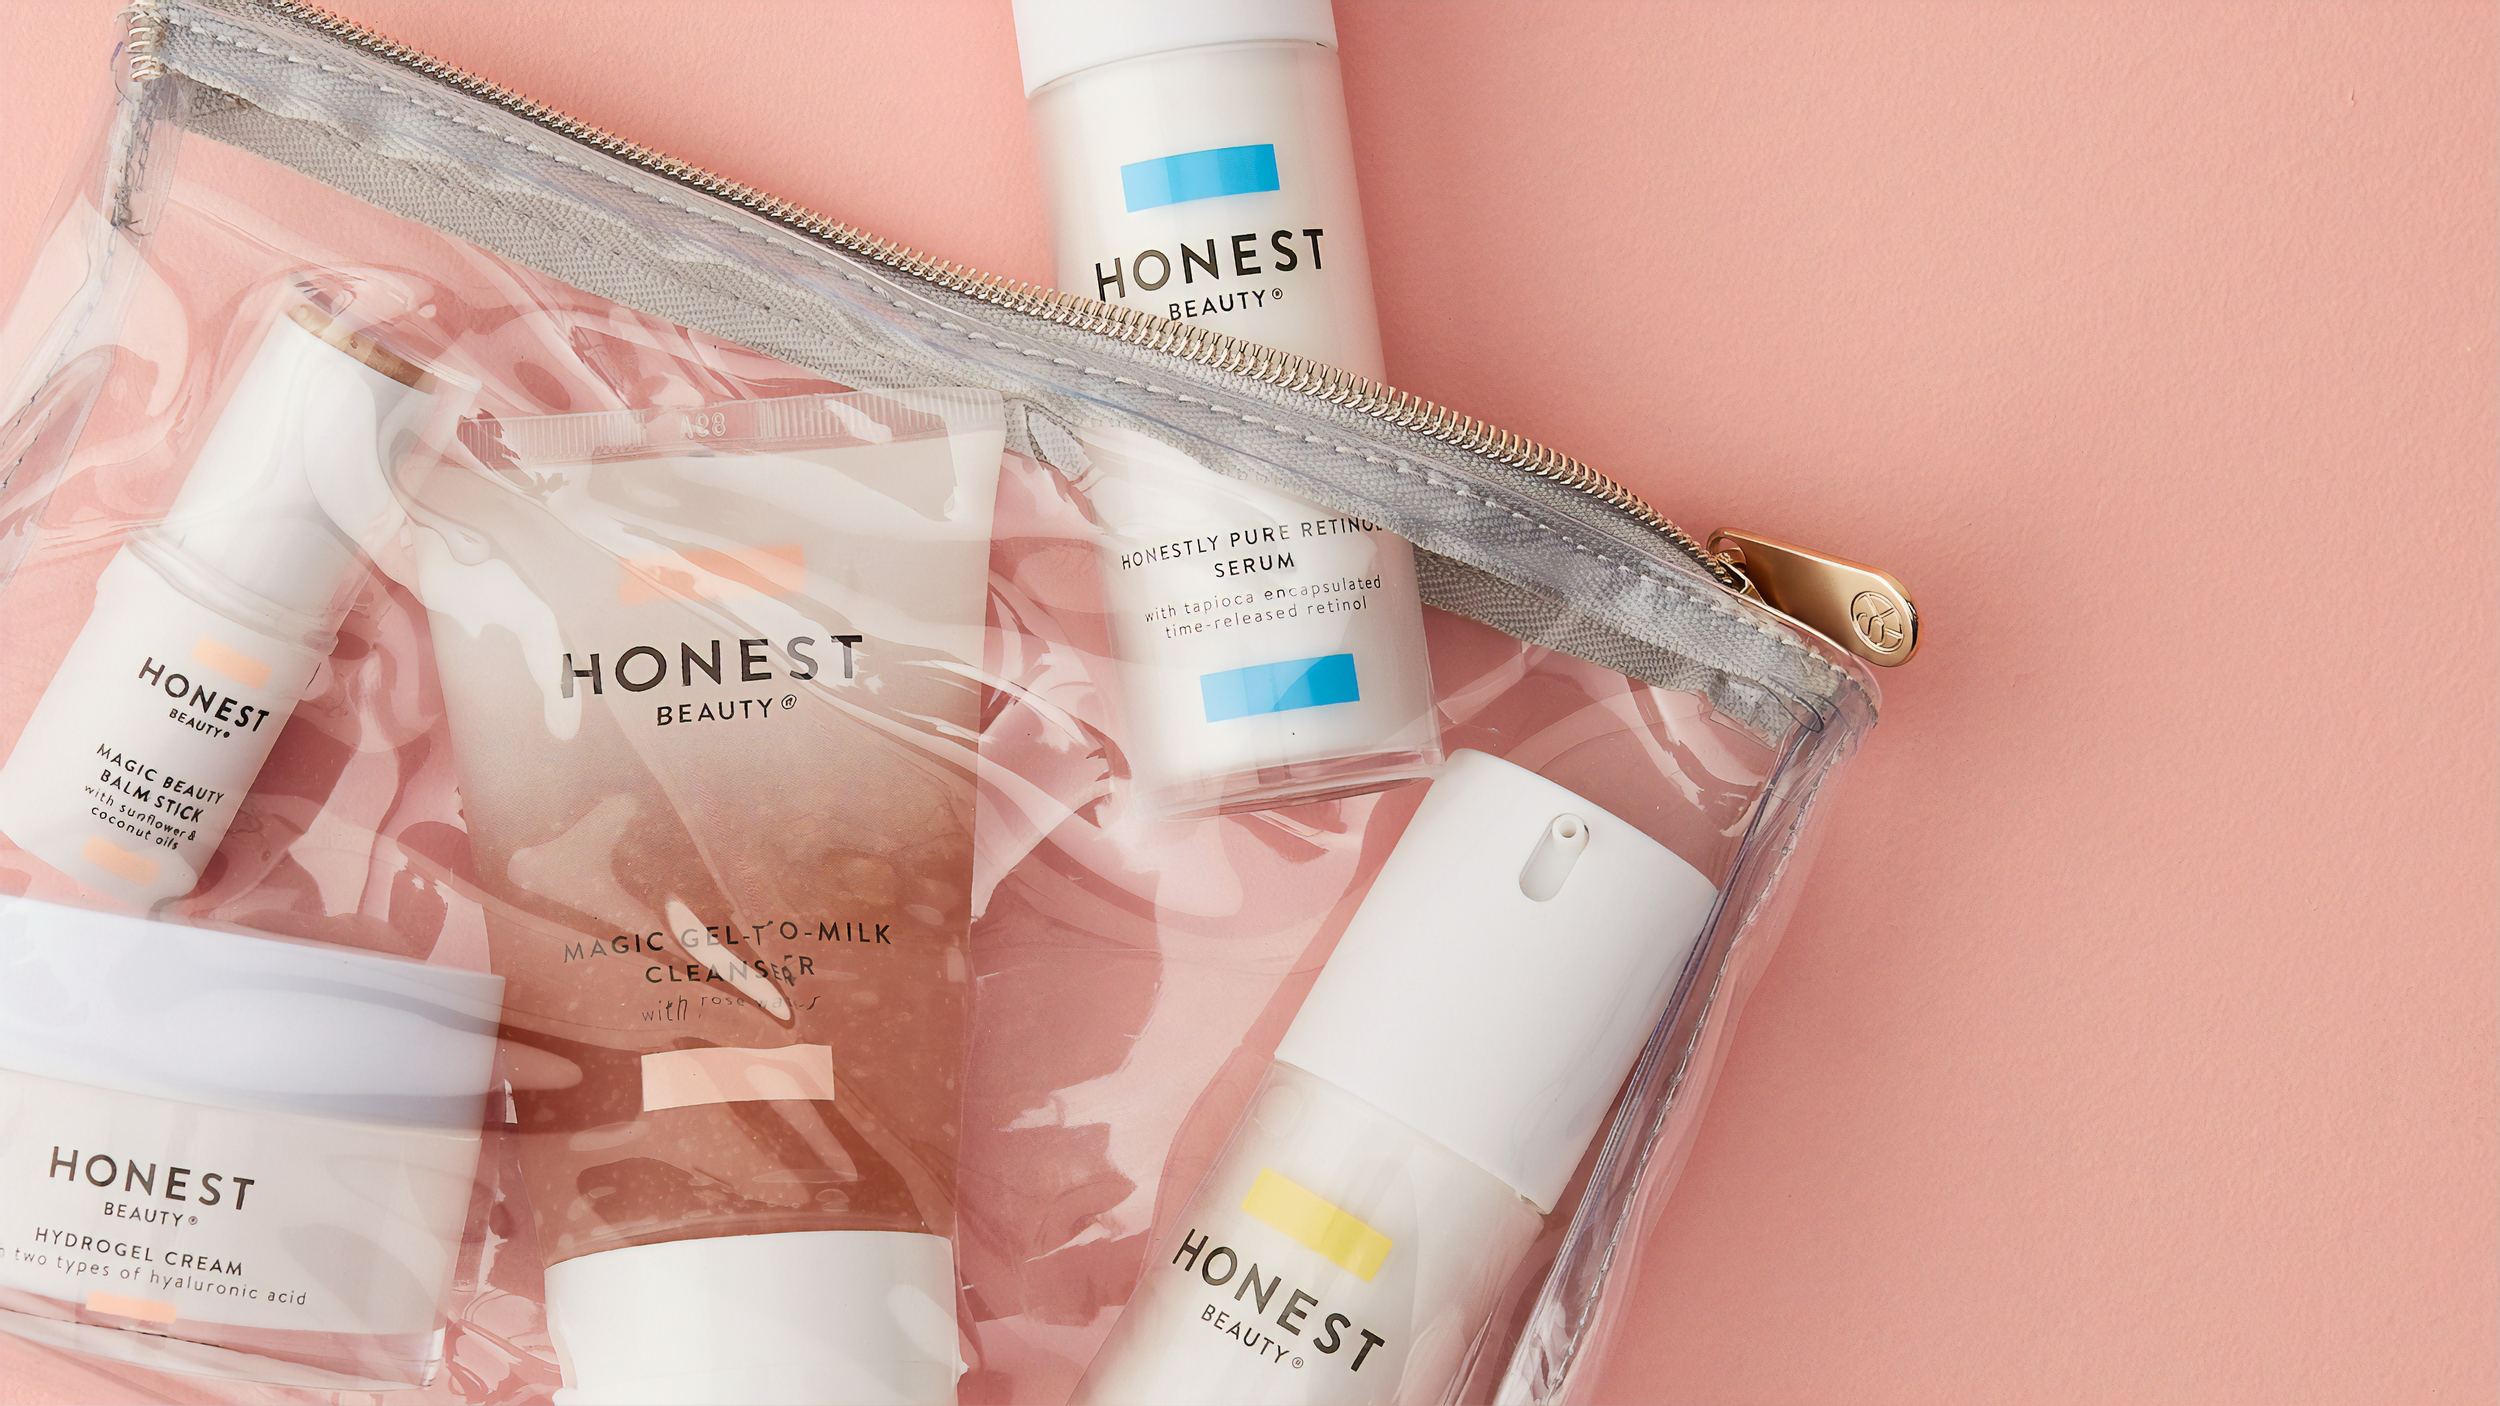 8 Toiletries Bag You Can Use to Store Your Personal Belongings